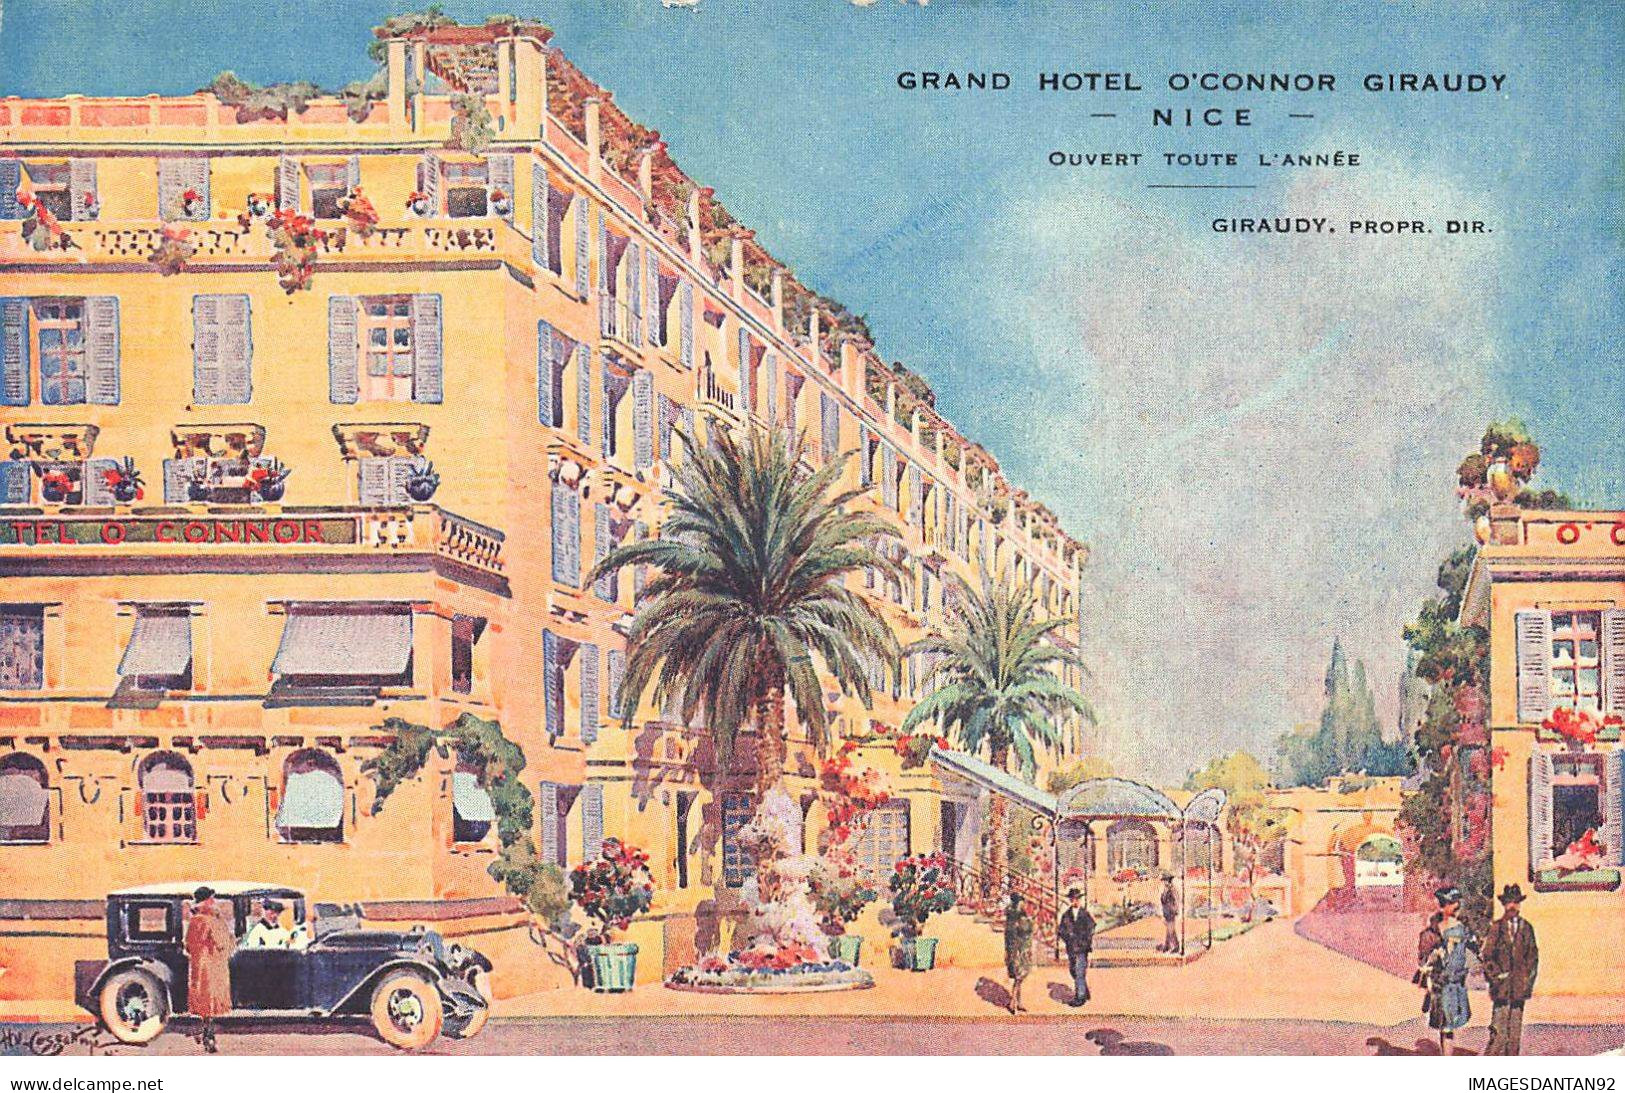 06 NICE #MK33403 GRAND HOTEL O CONNOR GIRAUDY NICE - Pubs, Hotels And Restaurants